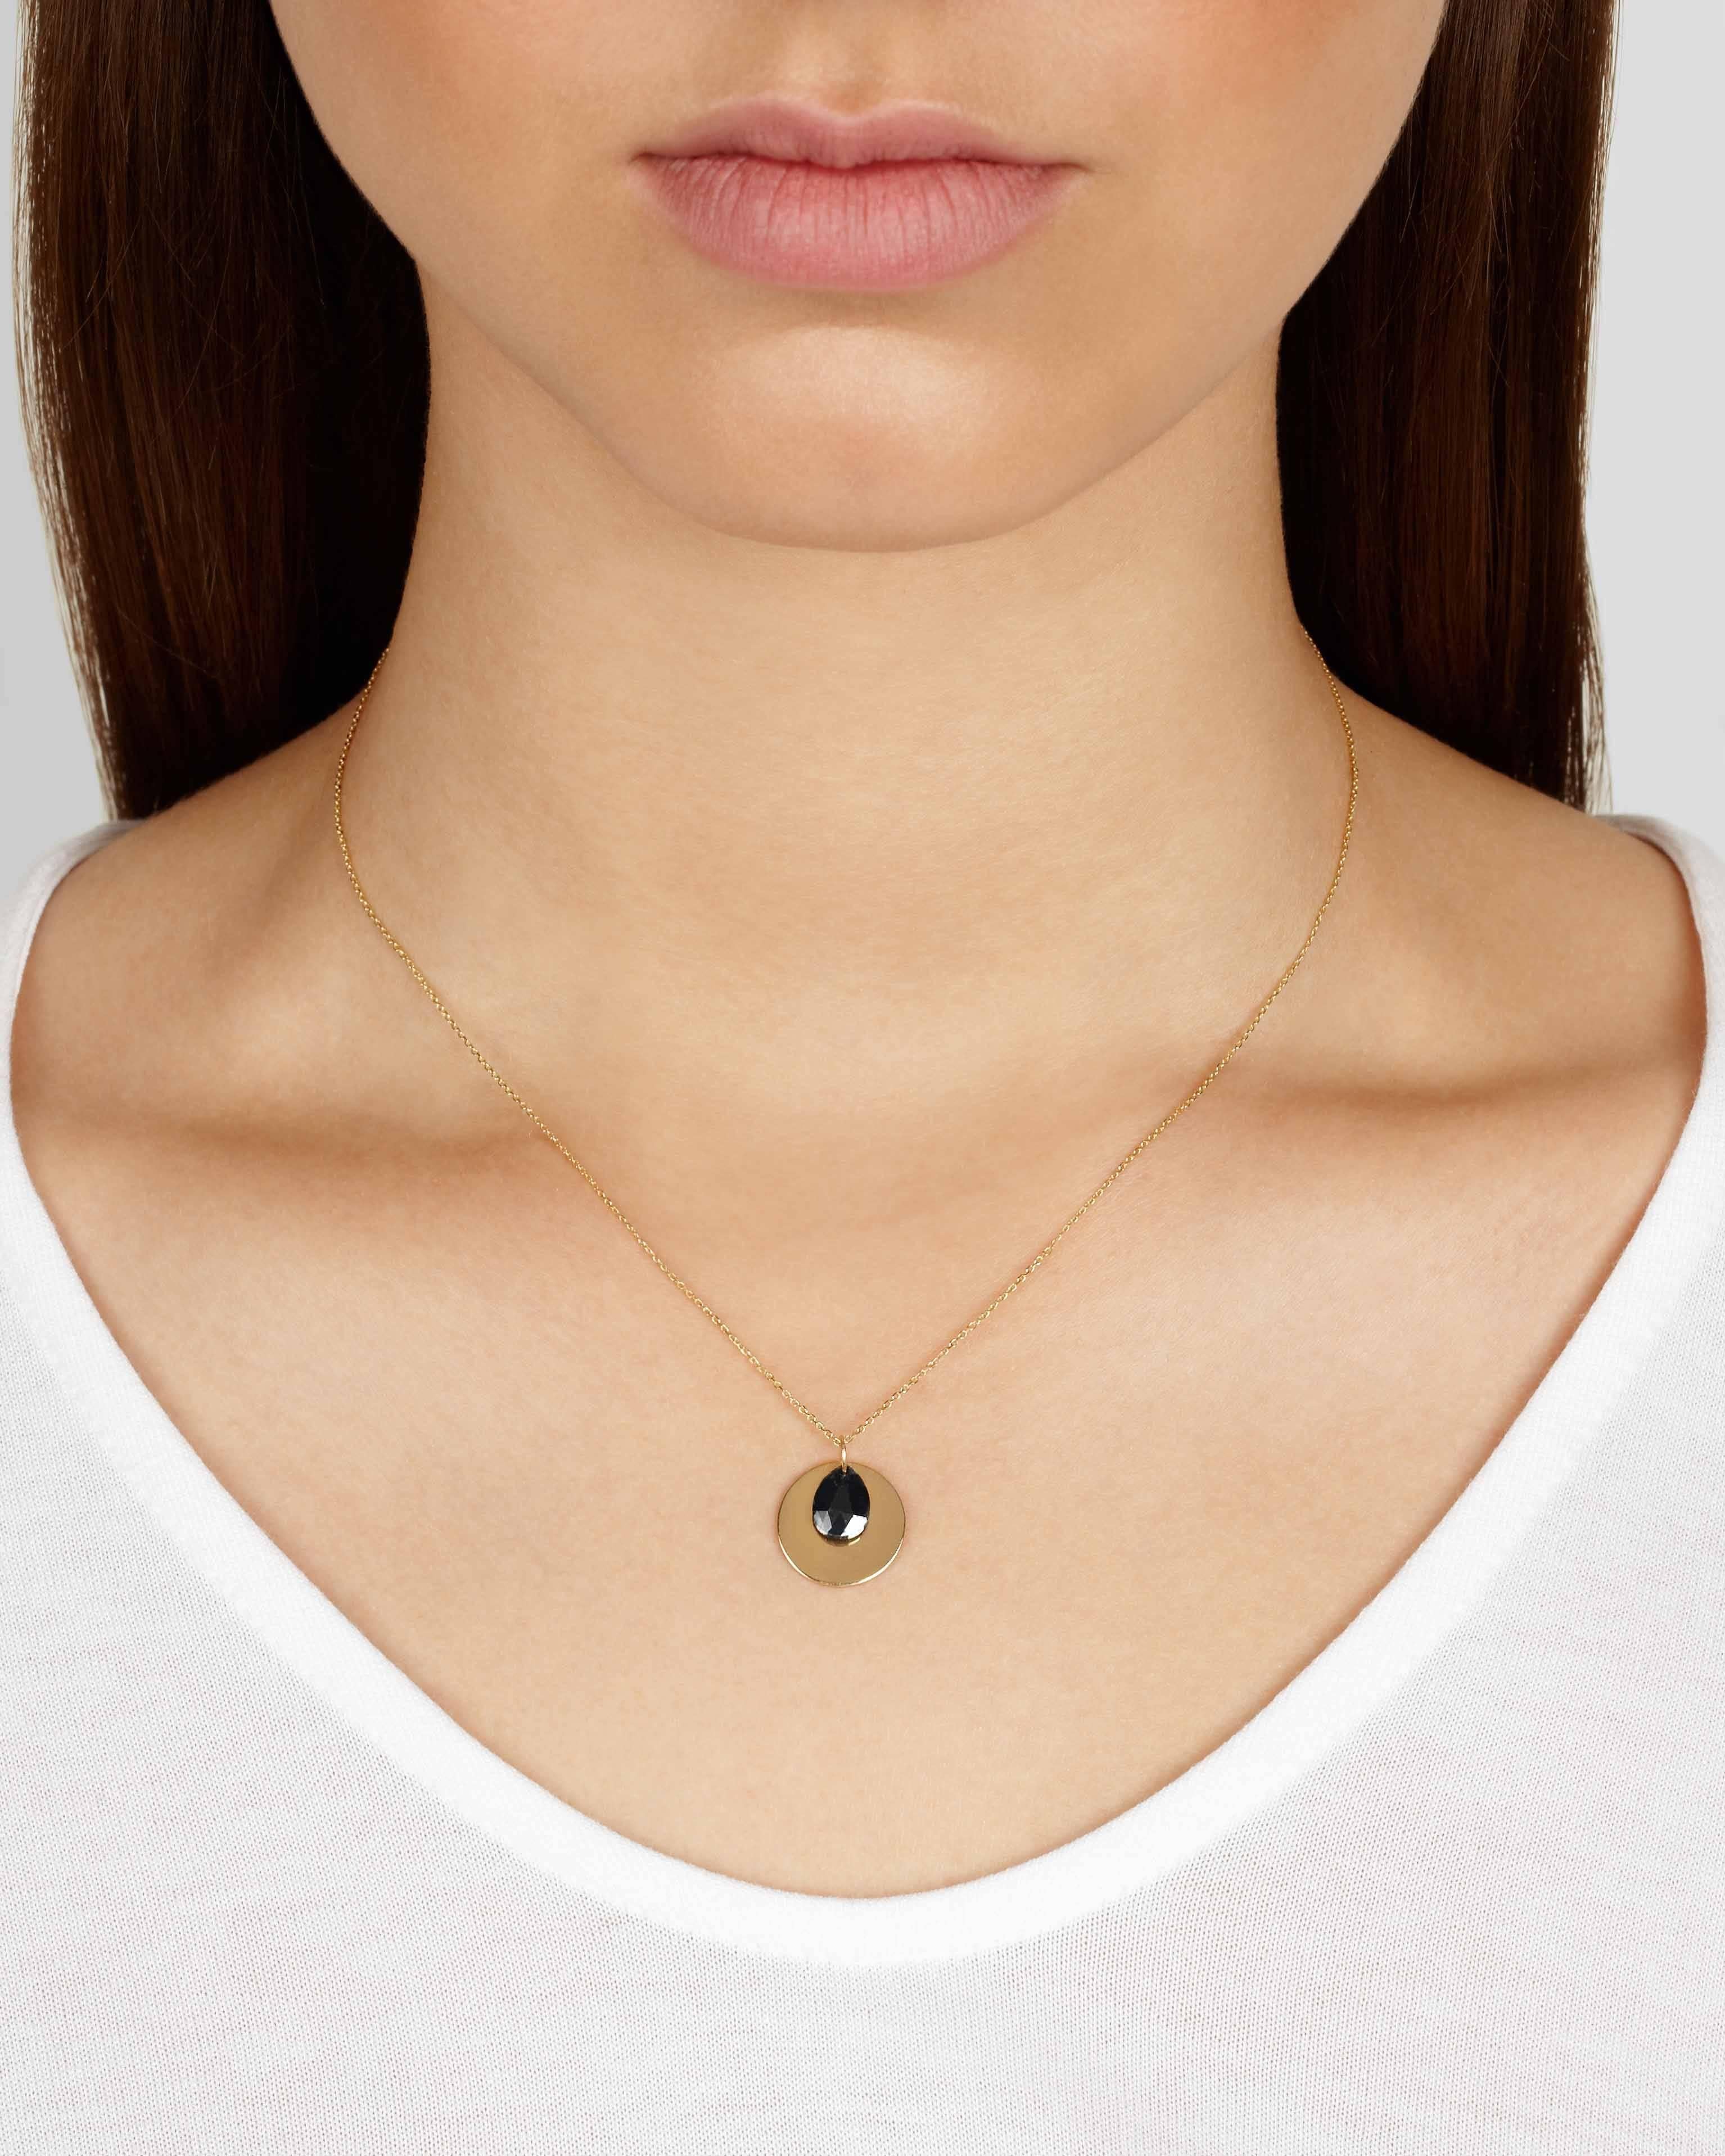 This delicate necklace features a solid 9-carat gold disc accentuated with a rustic rosecut pear-shaped black diamond. The diamond and the disc hang independently from a fine 18-inch 9-carat gold chain for a fluttering effect. The diamond measures